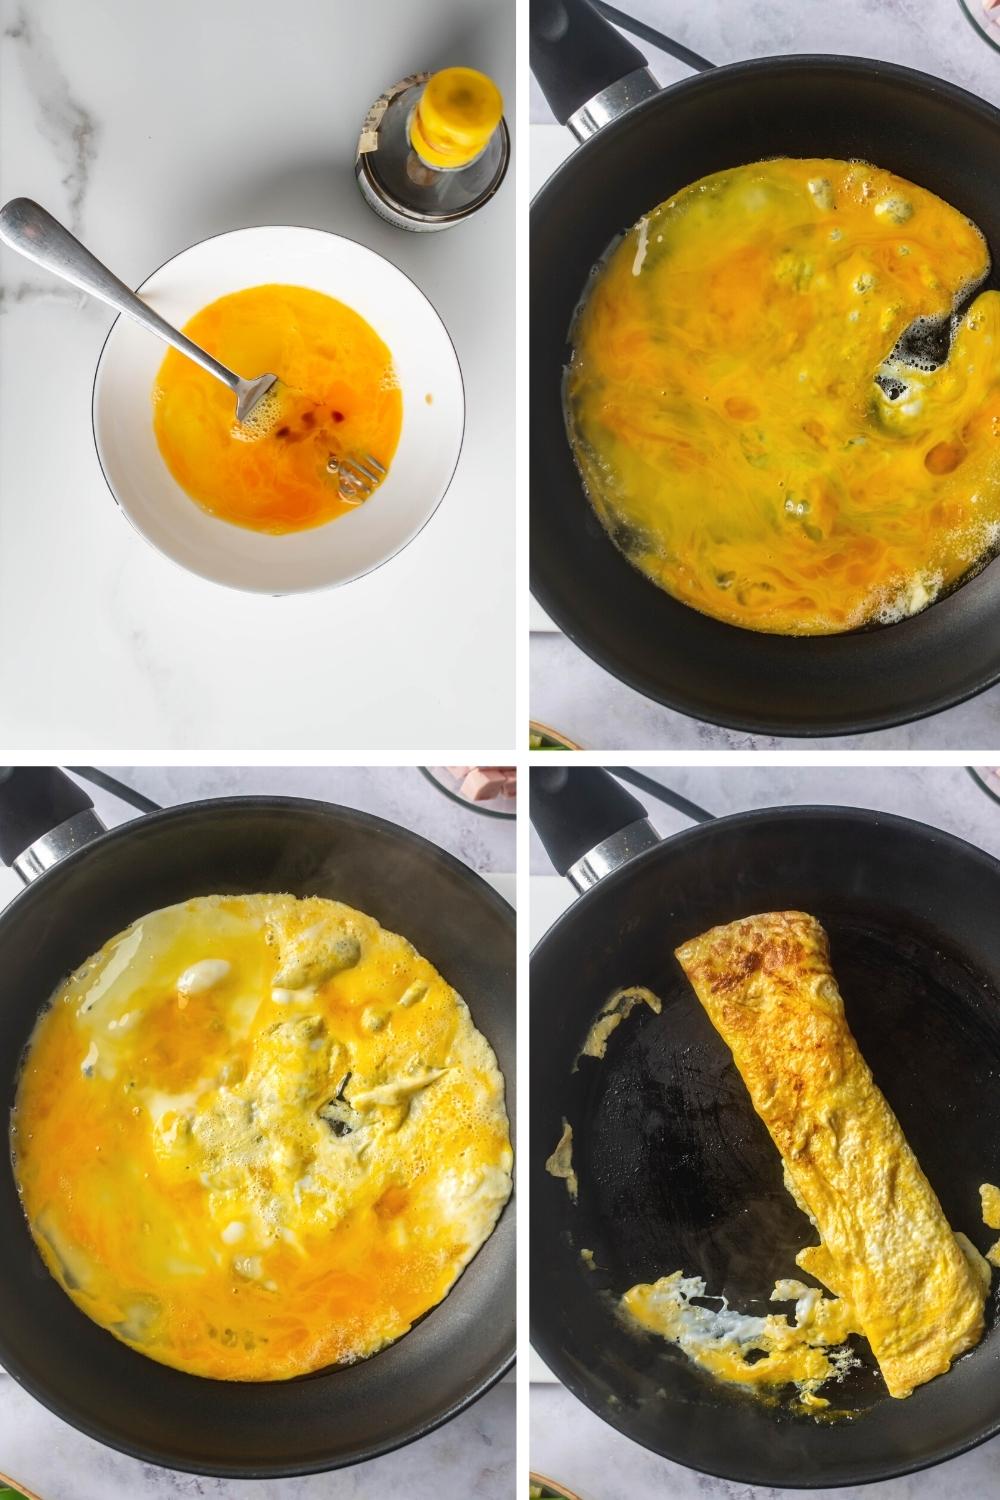 A four way split picture showing the process of cooking a fried egg.